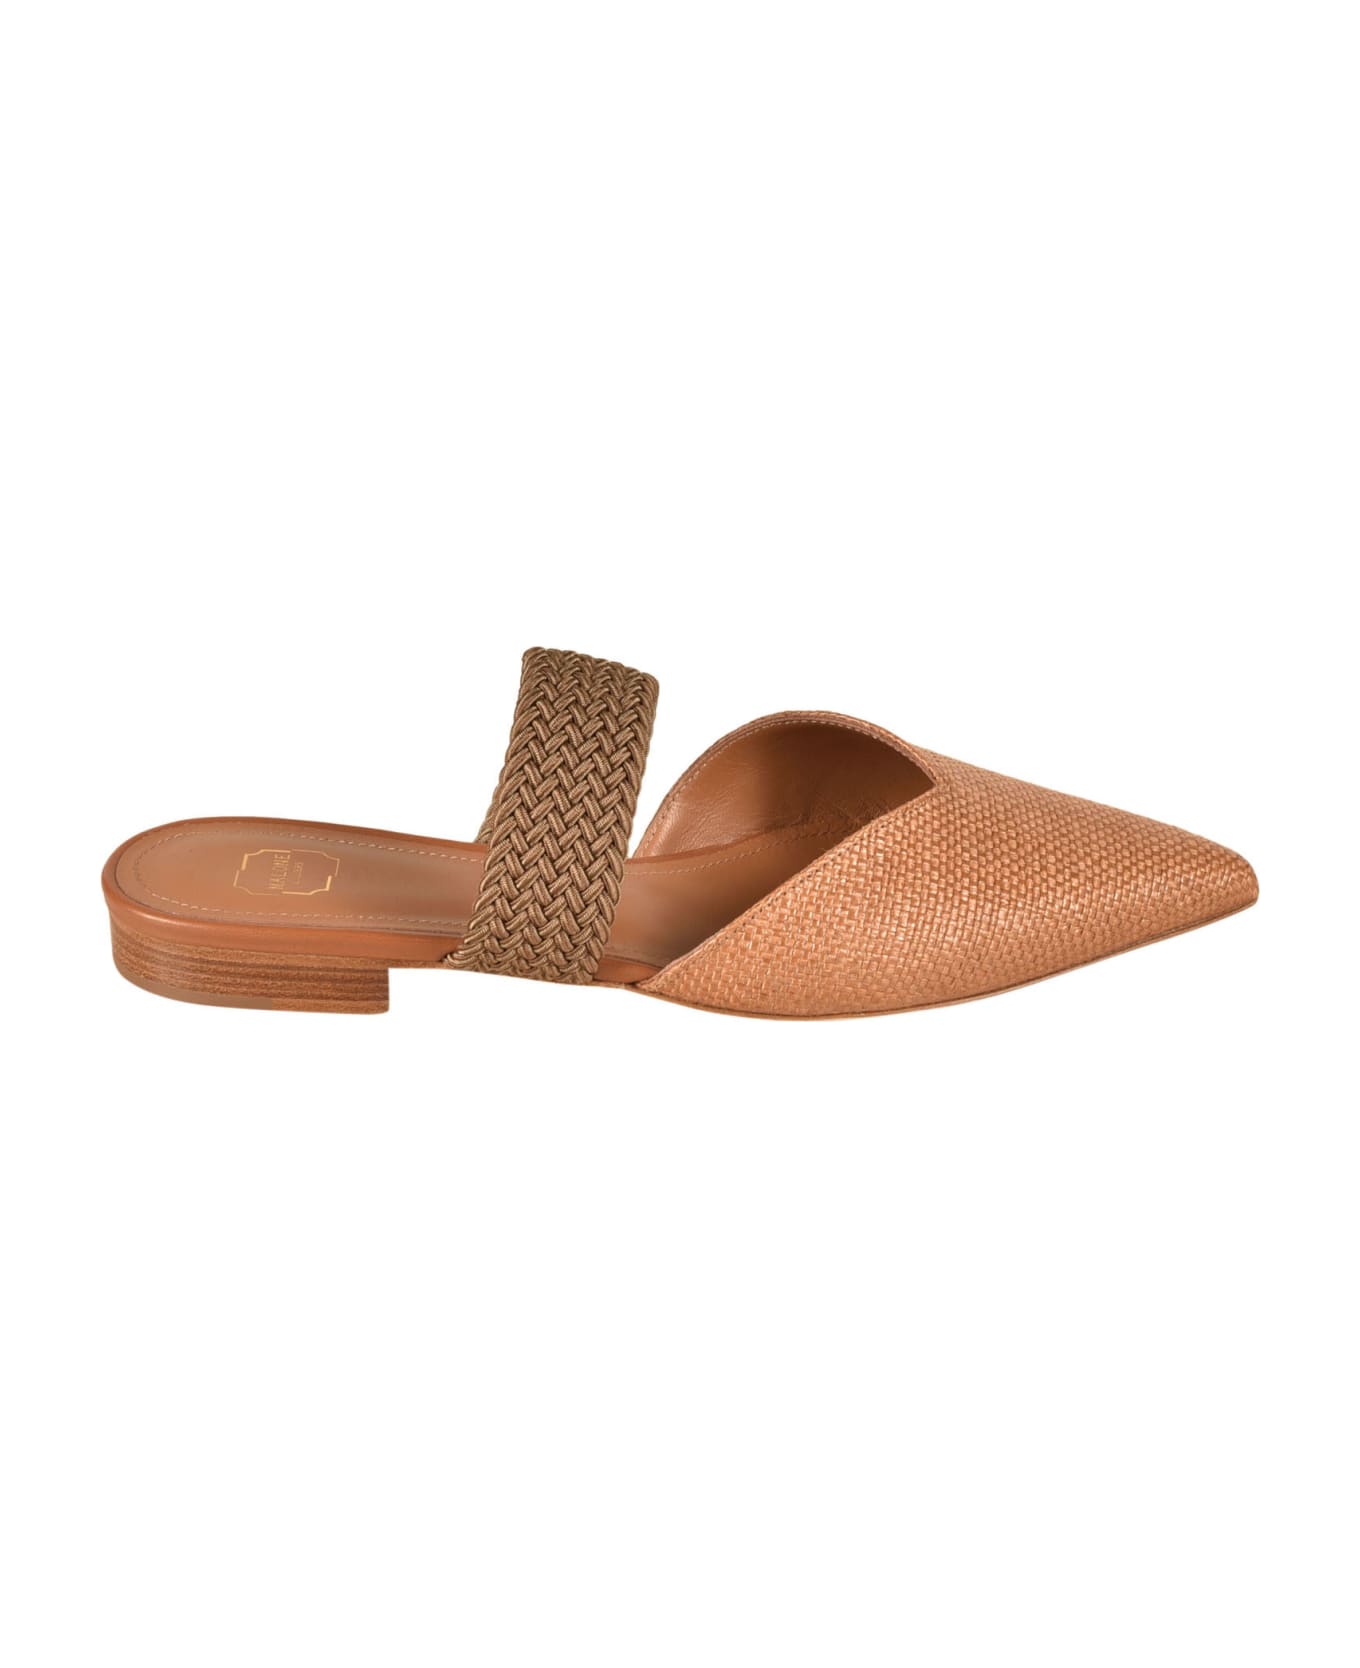 Malone Souliers Maisie Flat Mules - Brown